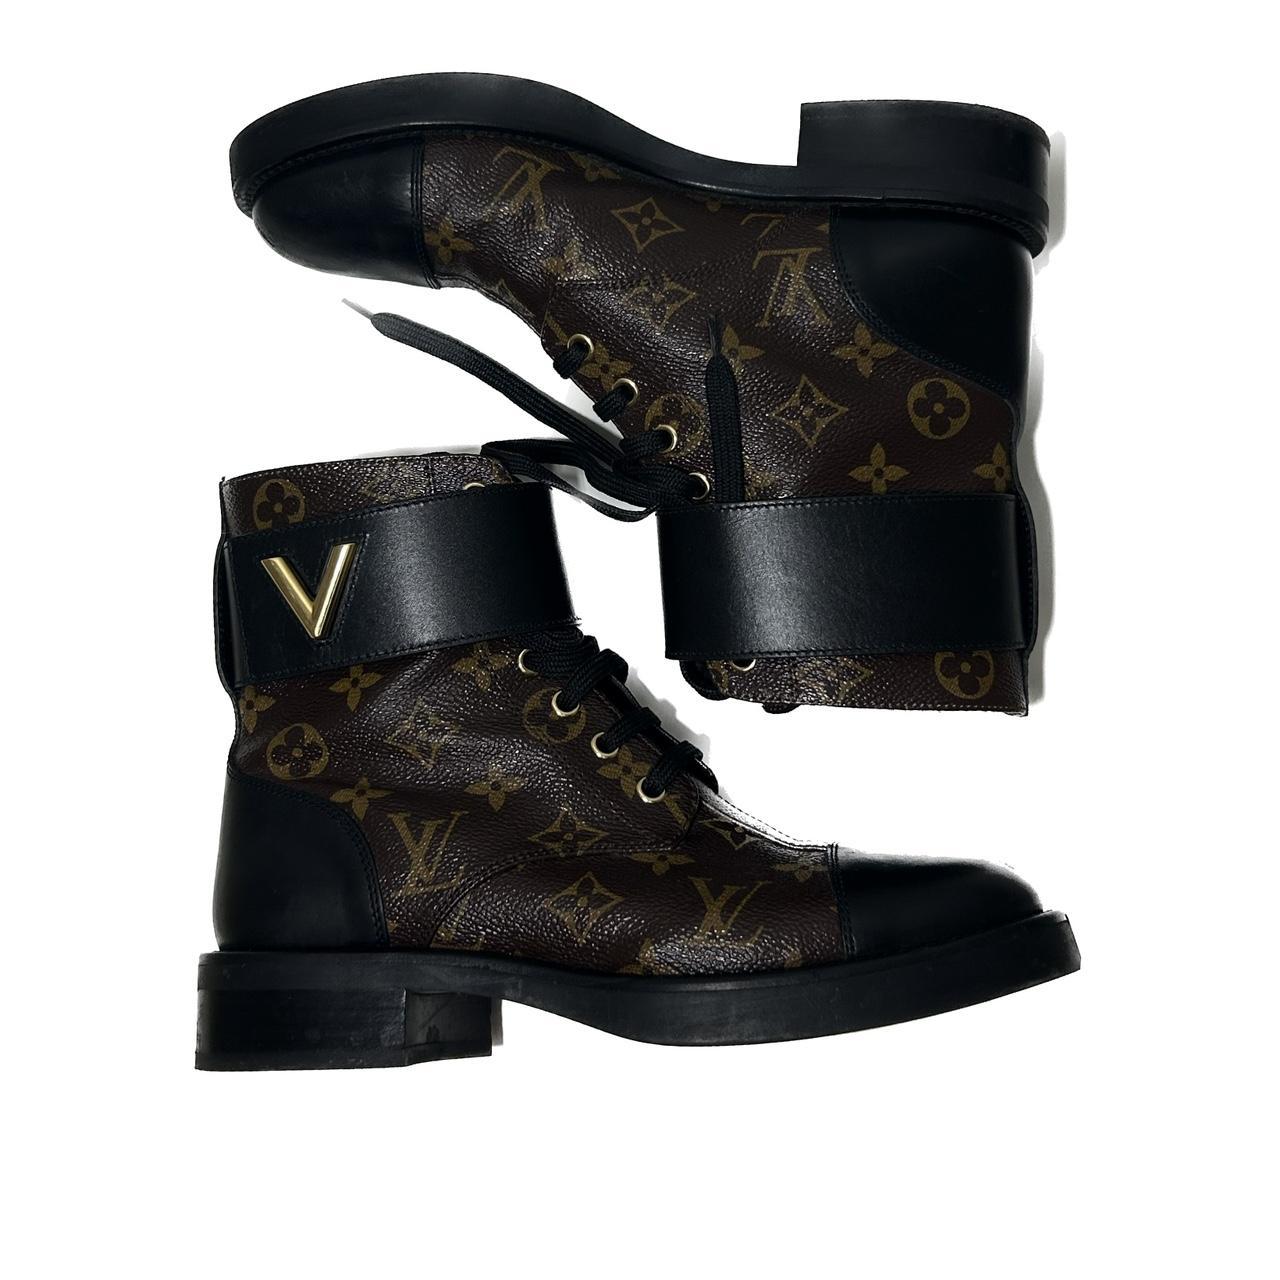 Louis Vuitton Women's boots size(6/.5) for Sale in Temecula, CA - OfferUp